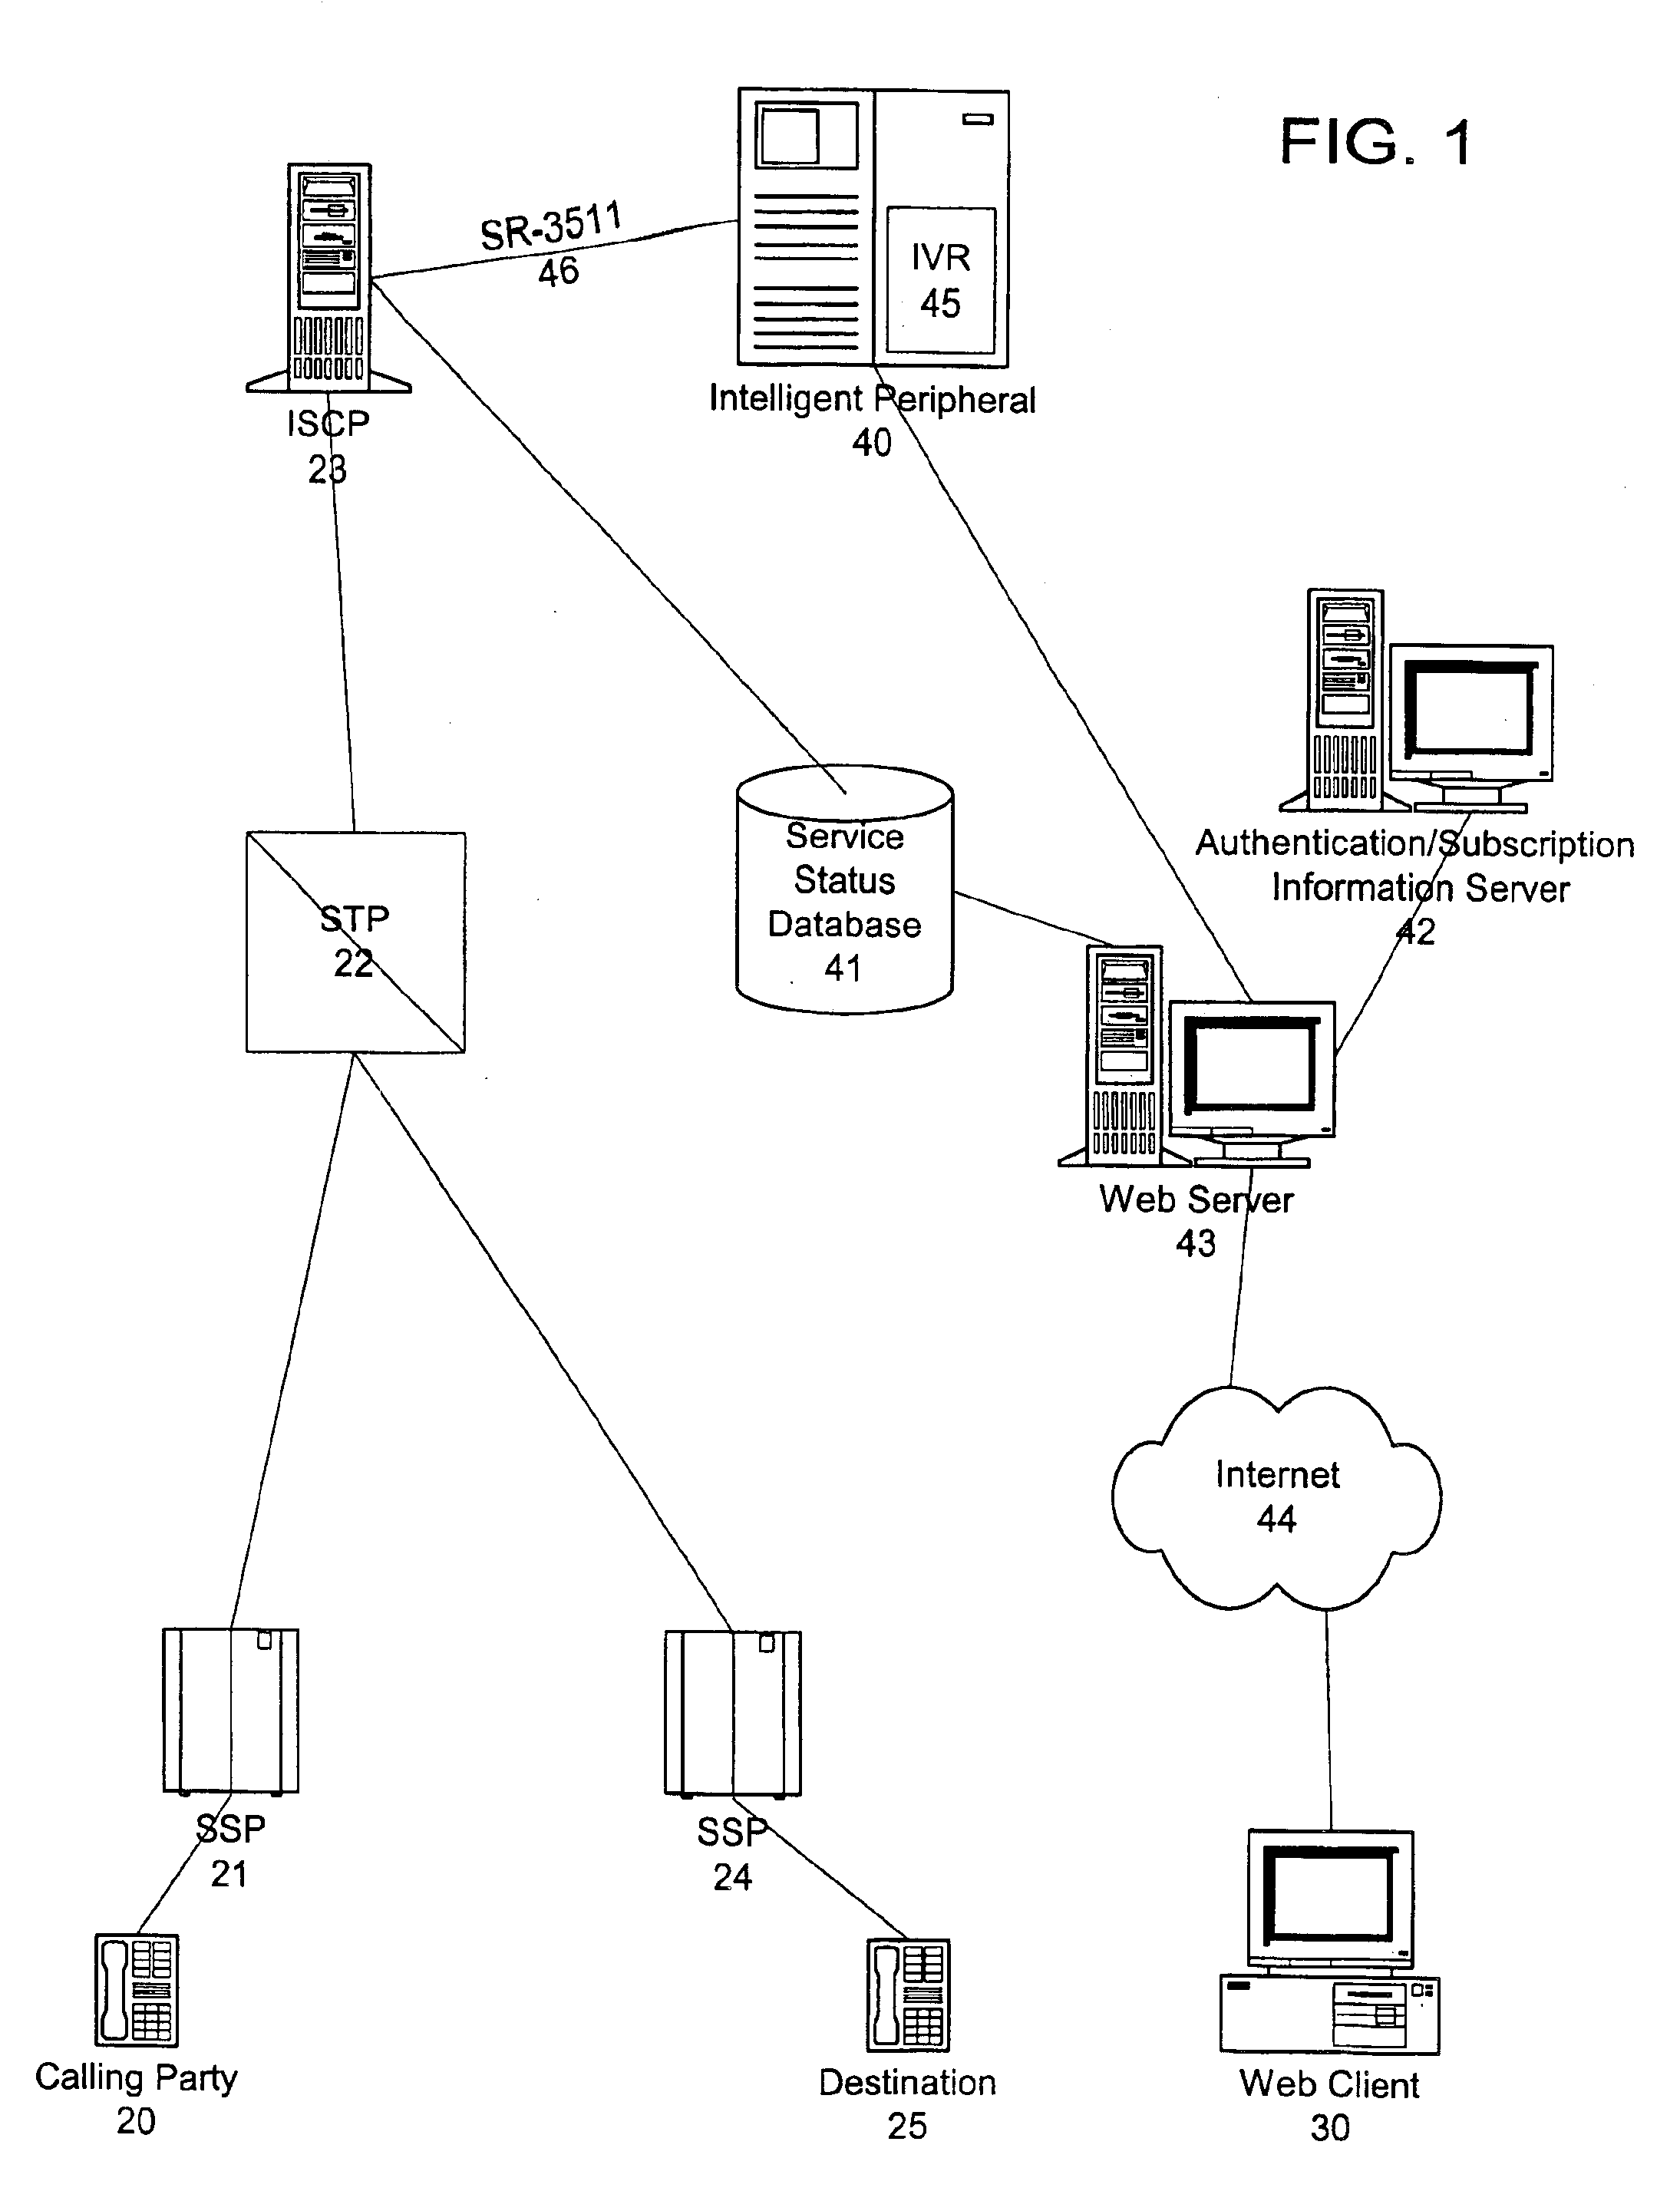 System and method for providing remote access to telecommunications services